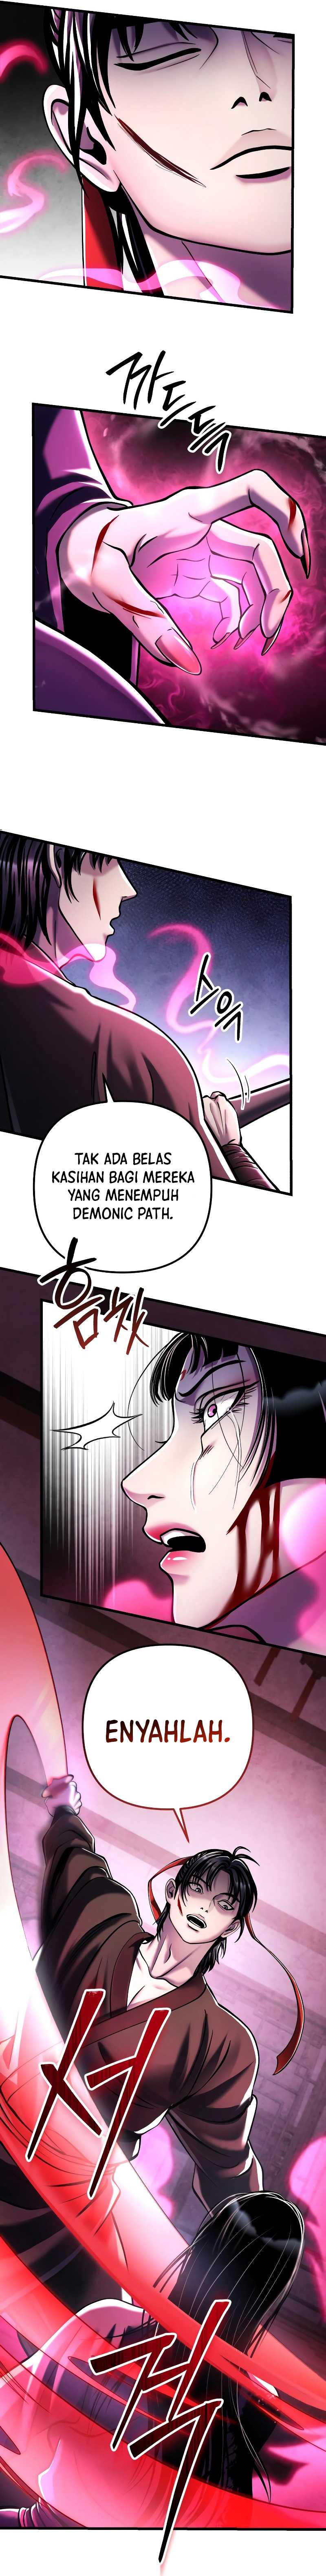 Ha Buk Paeng’s Youngest Son Chapter 124